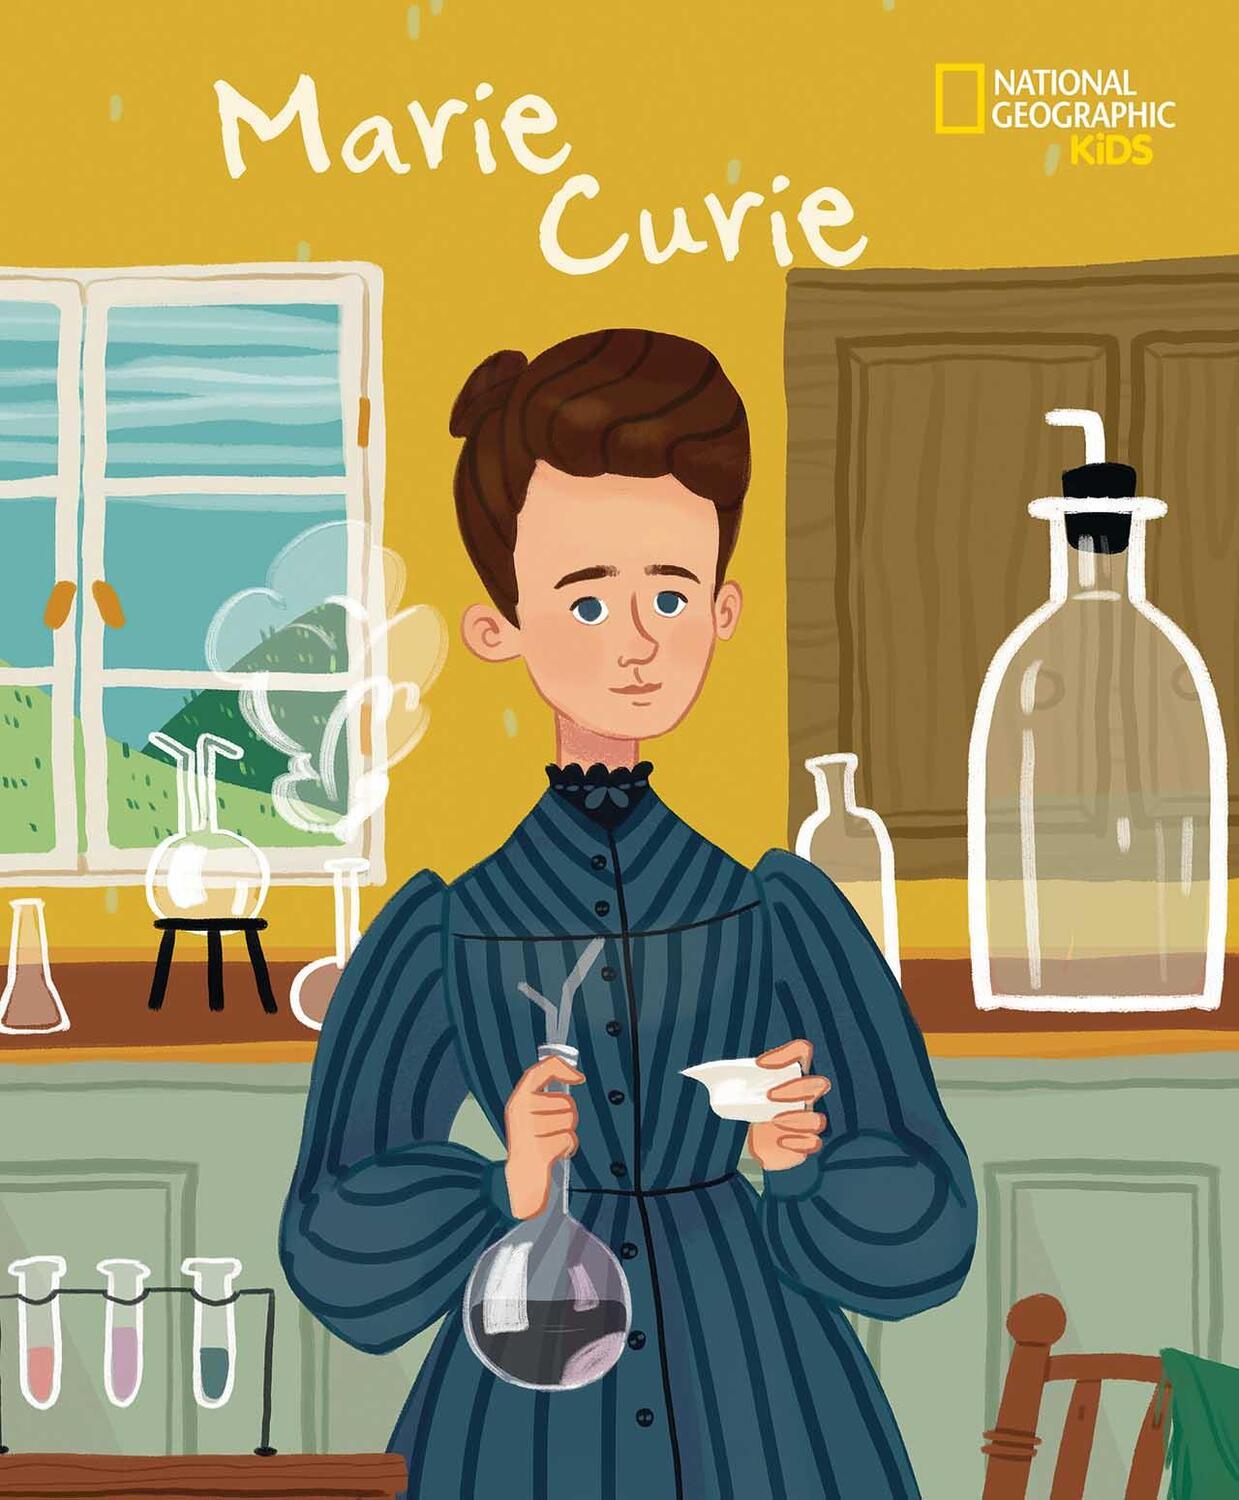 Cover: 9788854044425 | Total Genial! Marie Curie | National Geographic Kids | Isabel Munoz